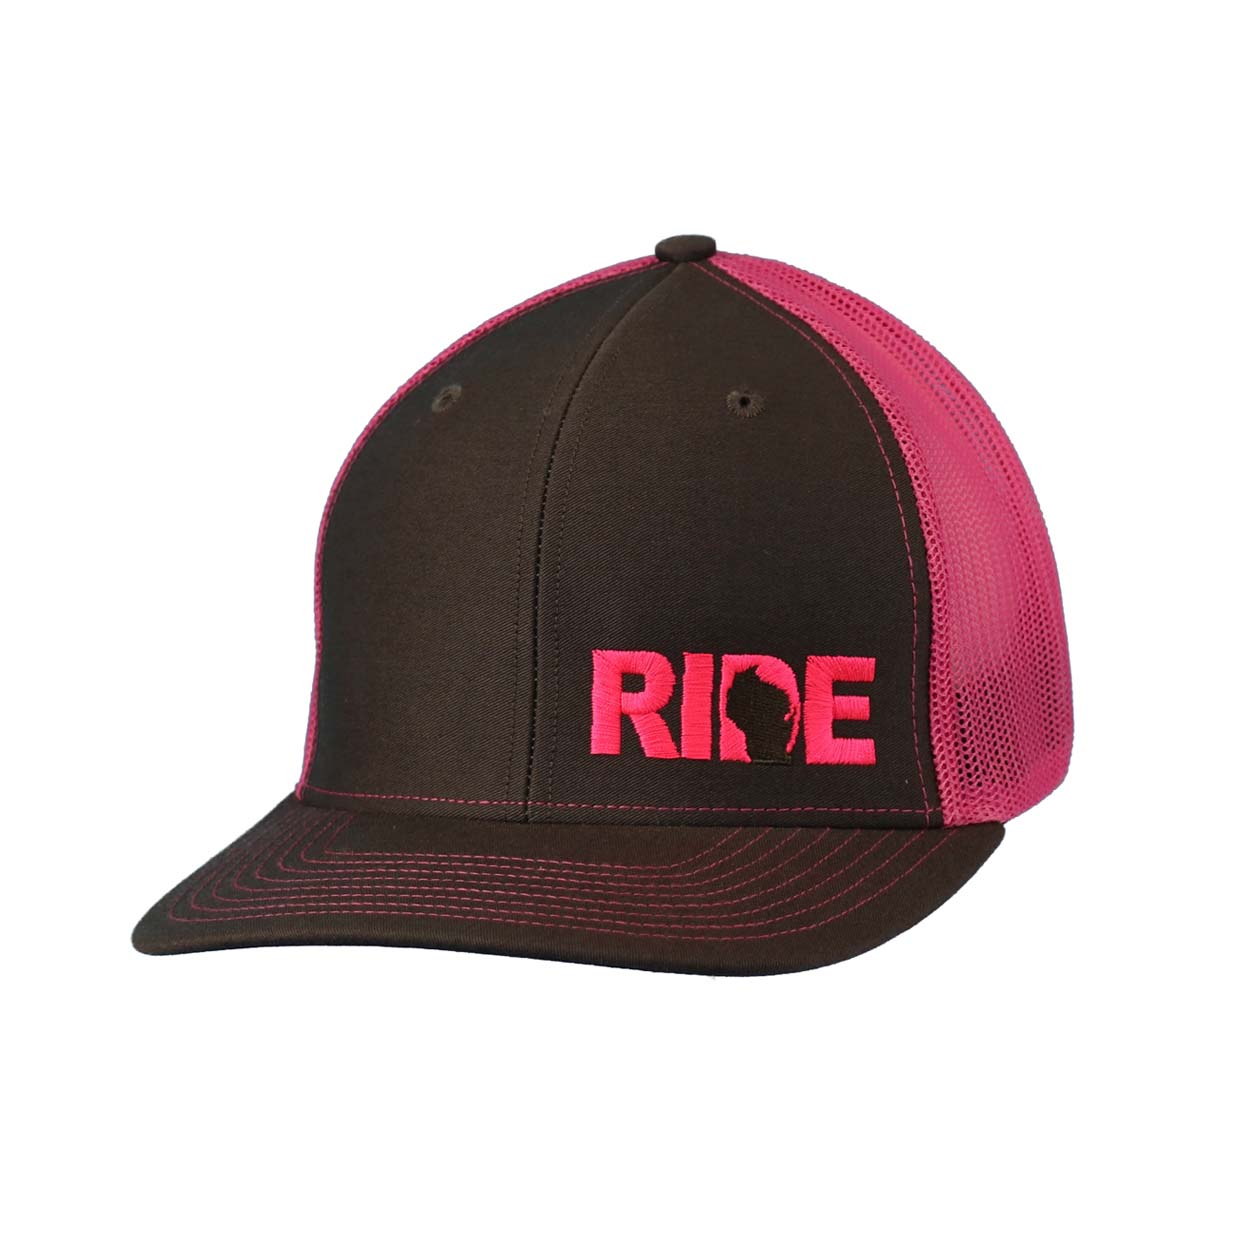 Ride Wisconsin Night Out Embroidered Snapback Trucker Hat Charcoal/Pink